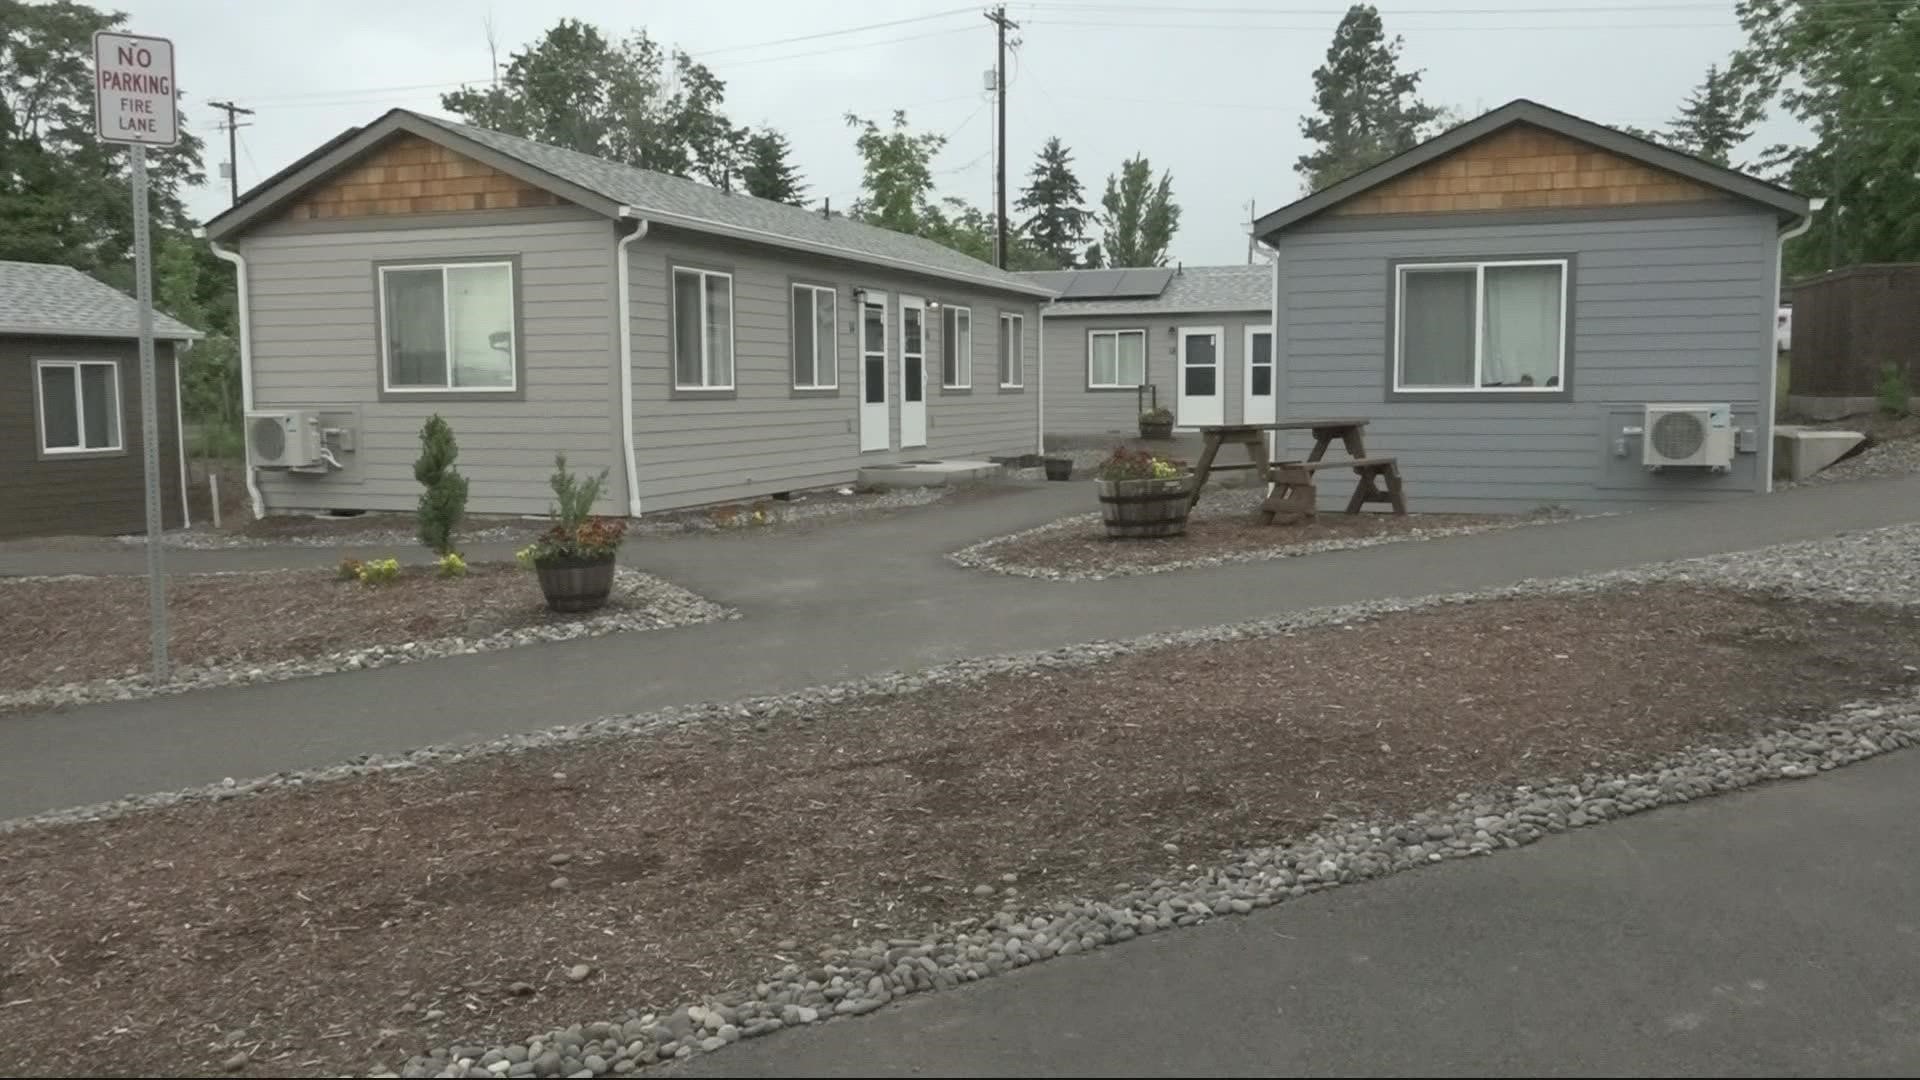 Fruit Valley Terrace provides transitional housing to about 40 people who were formerly experiencing homelessness.